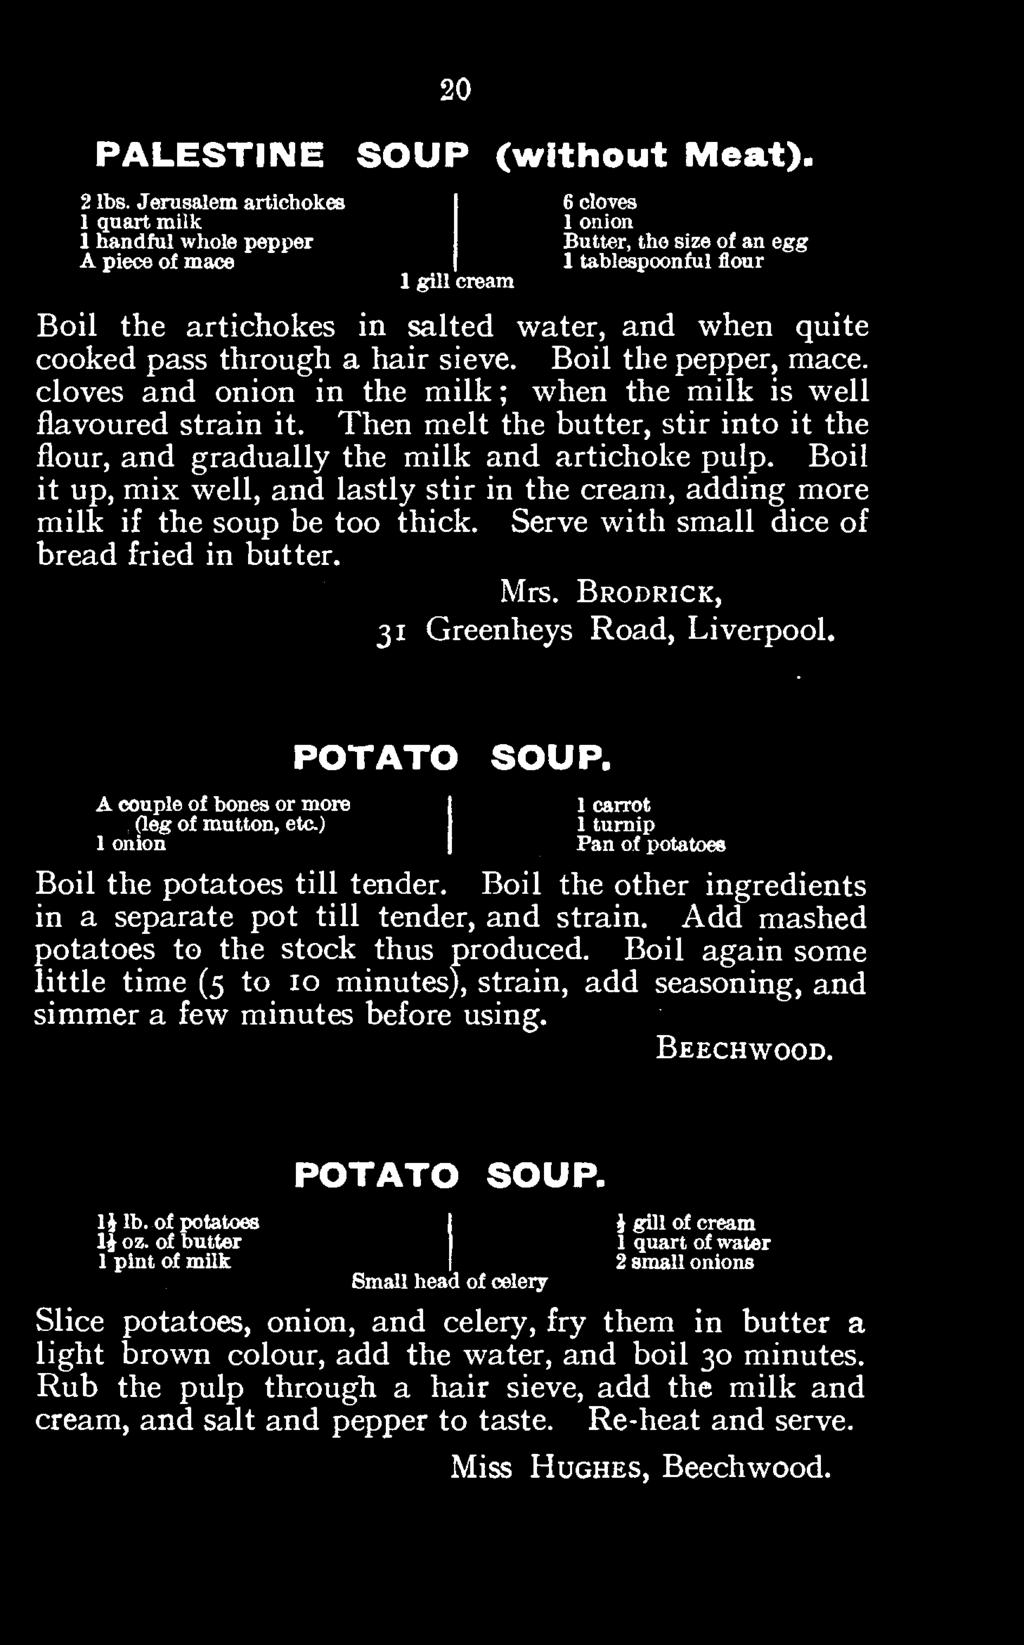 Serve with small dice of bread fried in butter. Mrs. Brodrick, 31 Greenheys Road, Liverpool. POTATO SOUP. A couple {leg of of mutton, bones or etc.